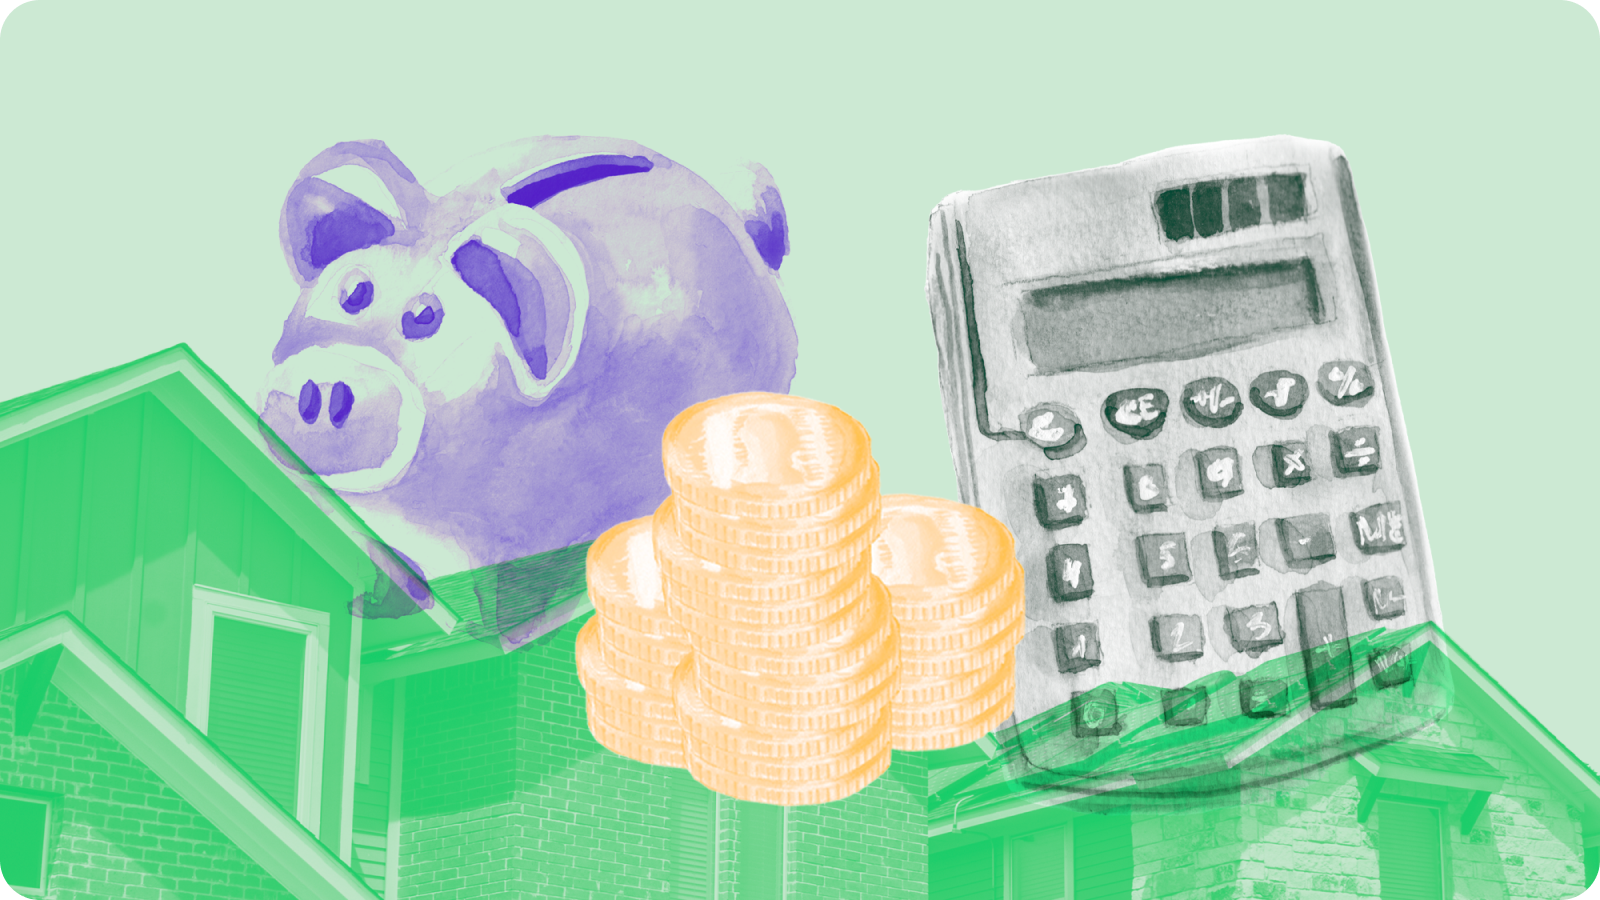 "Image of piggy bank, coins and calculator